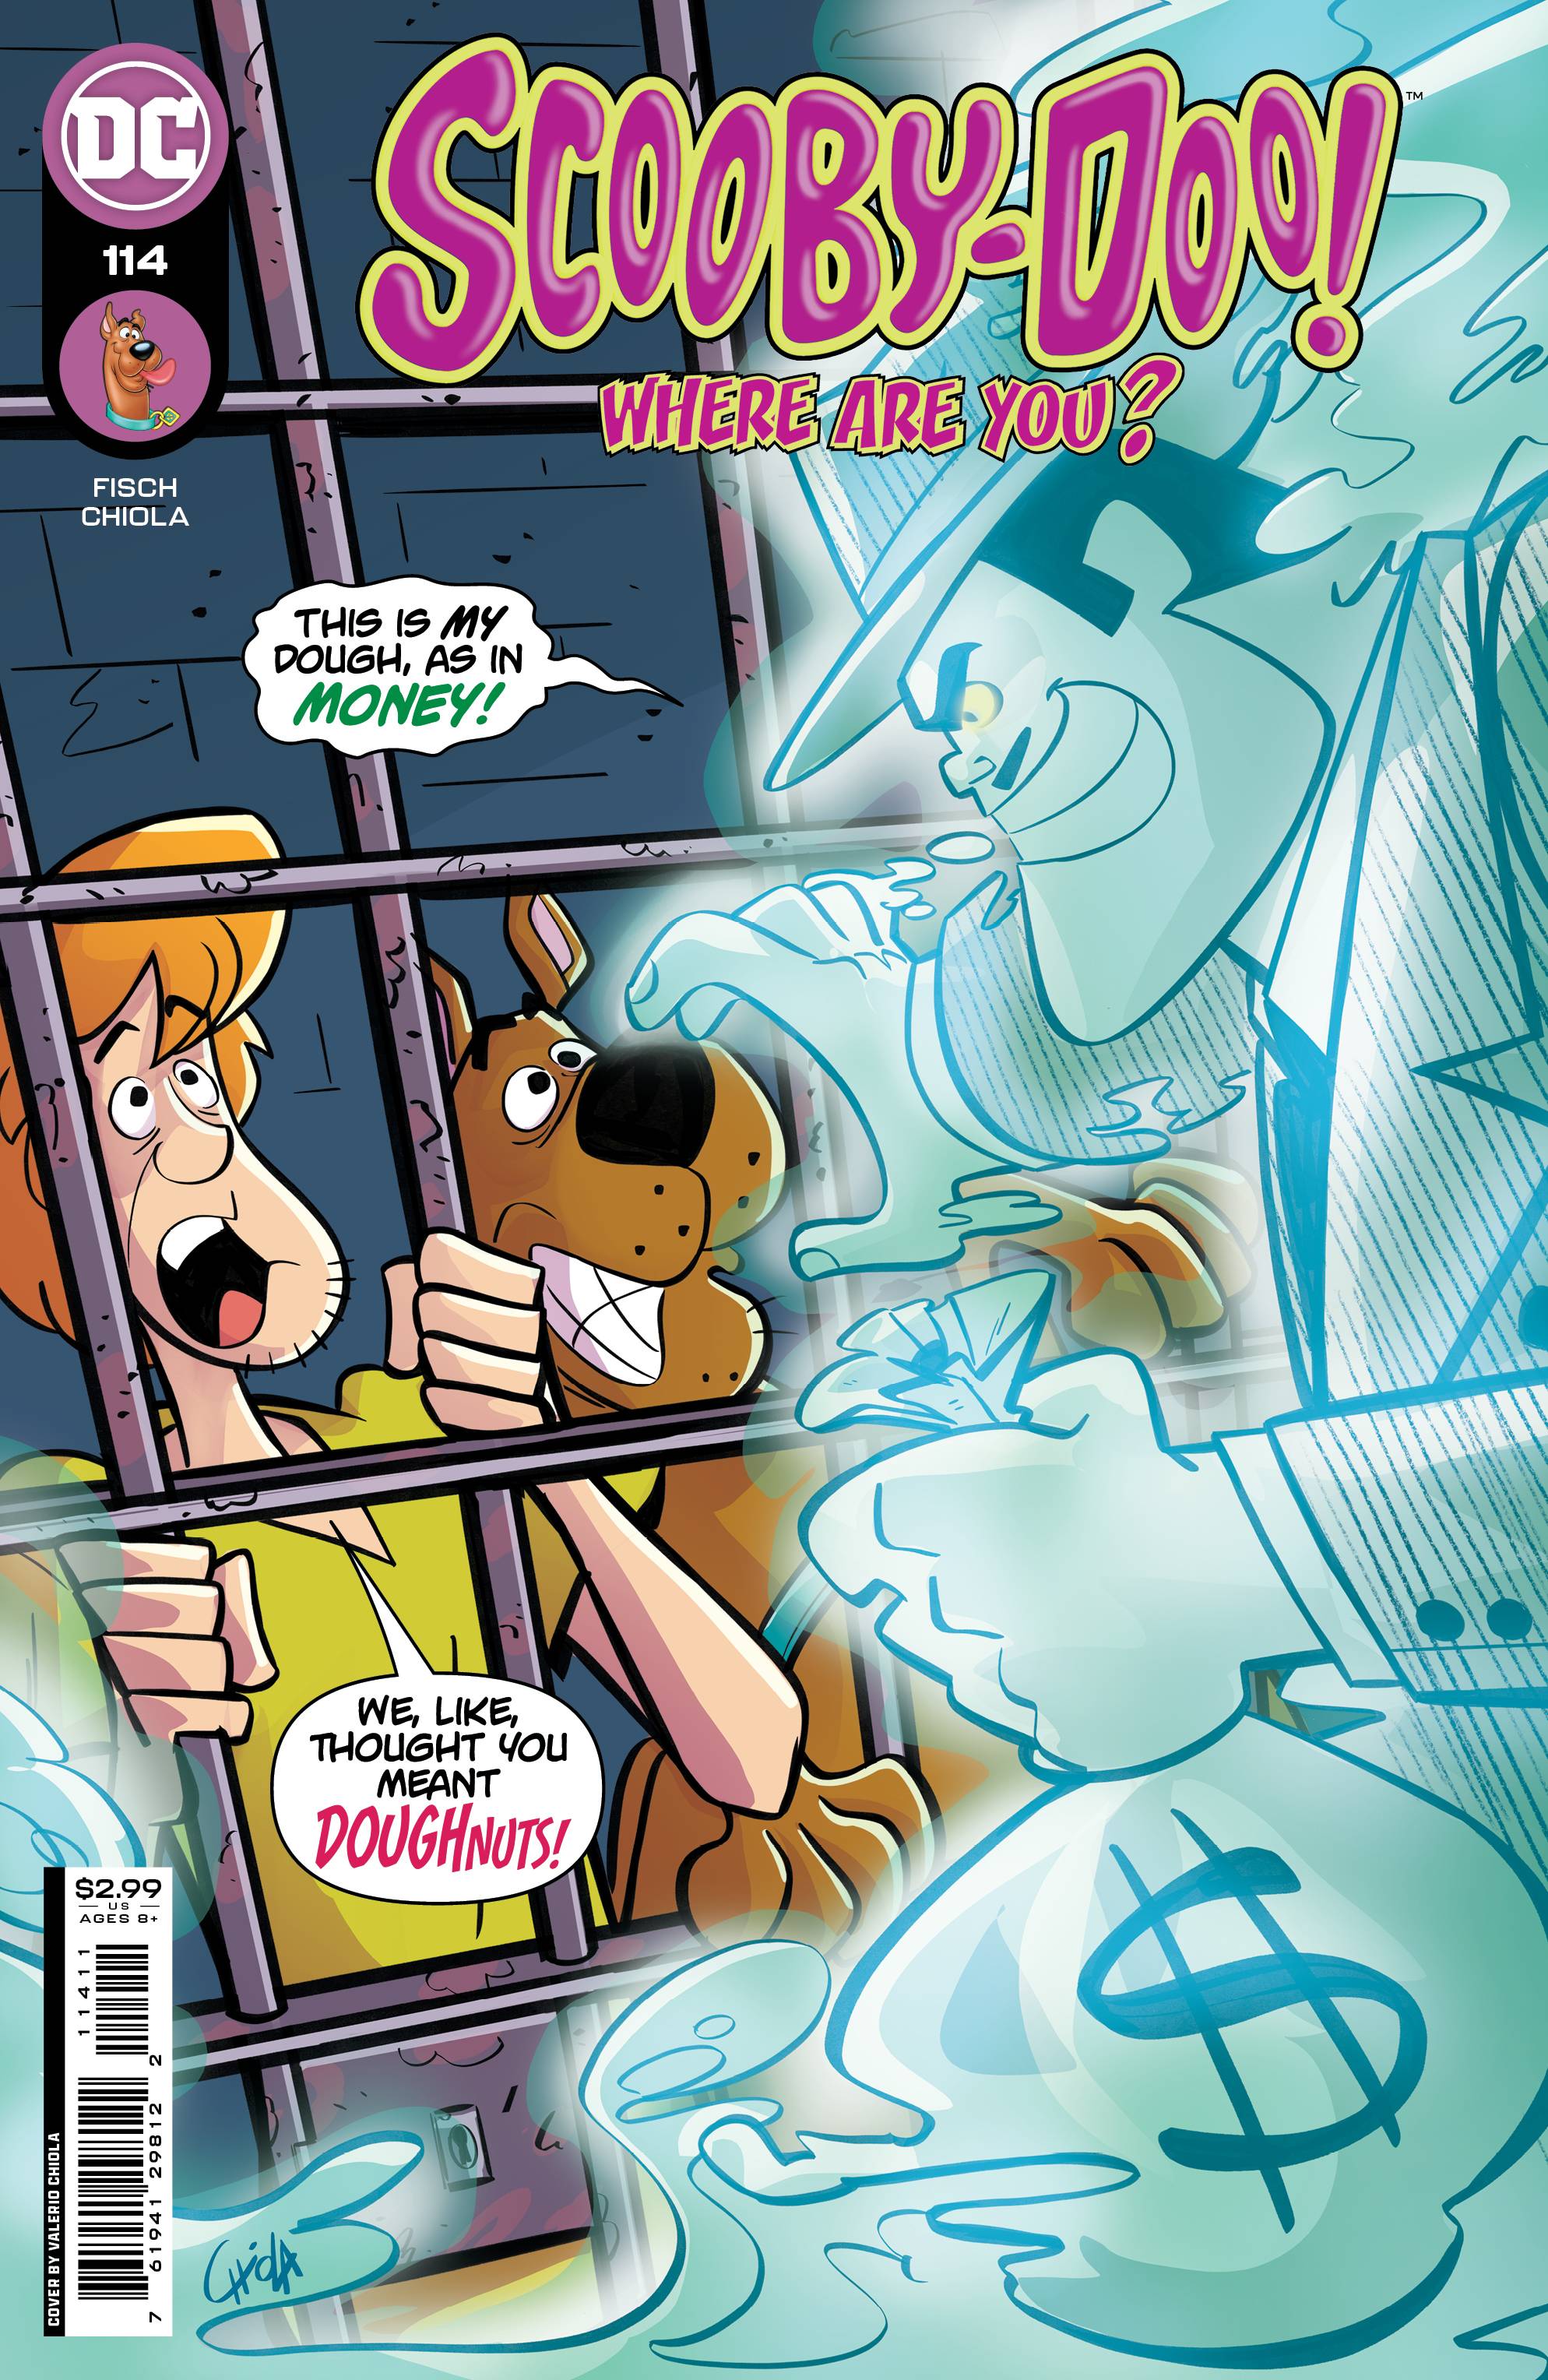 SCOOBY DOO WHERE ARE YOU #114 | Game Master's Emporium (The New GME)